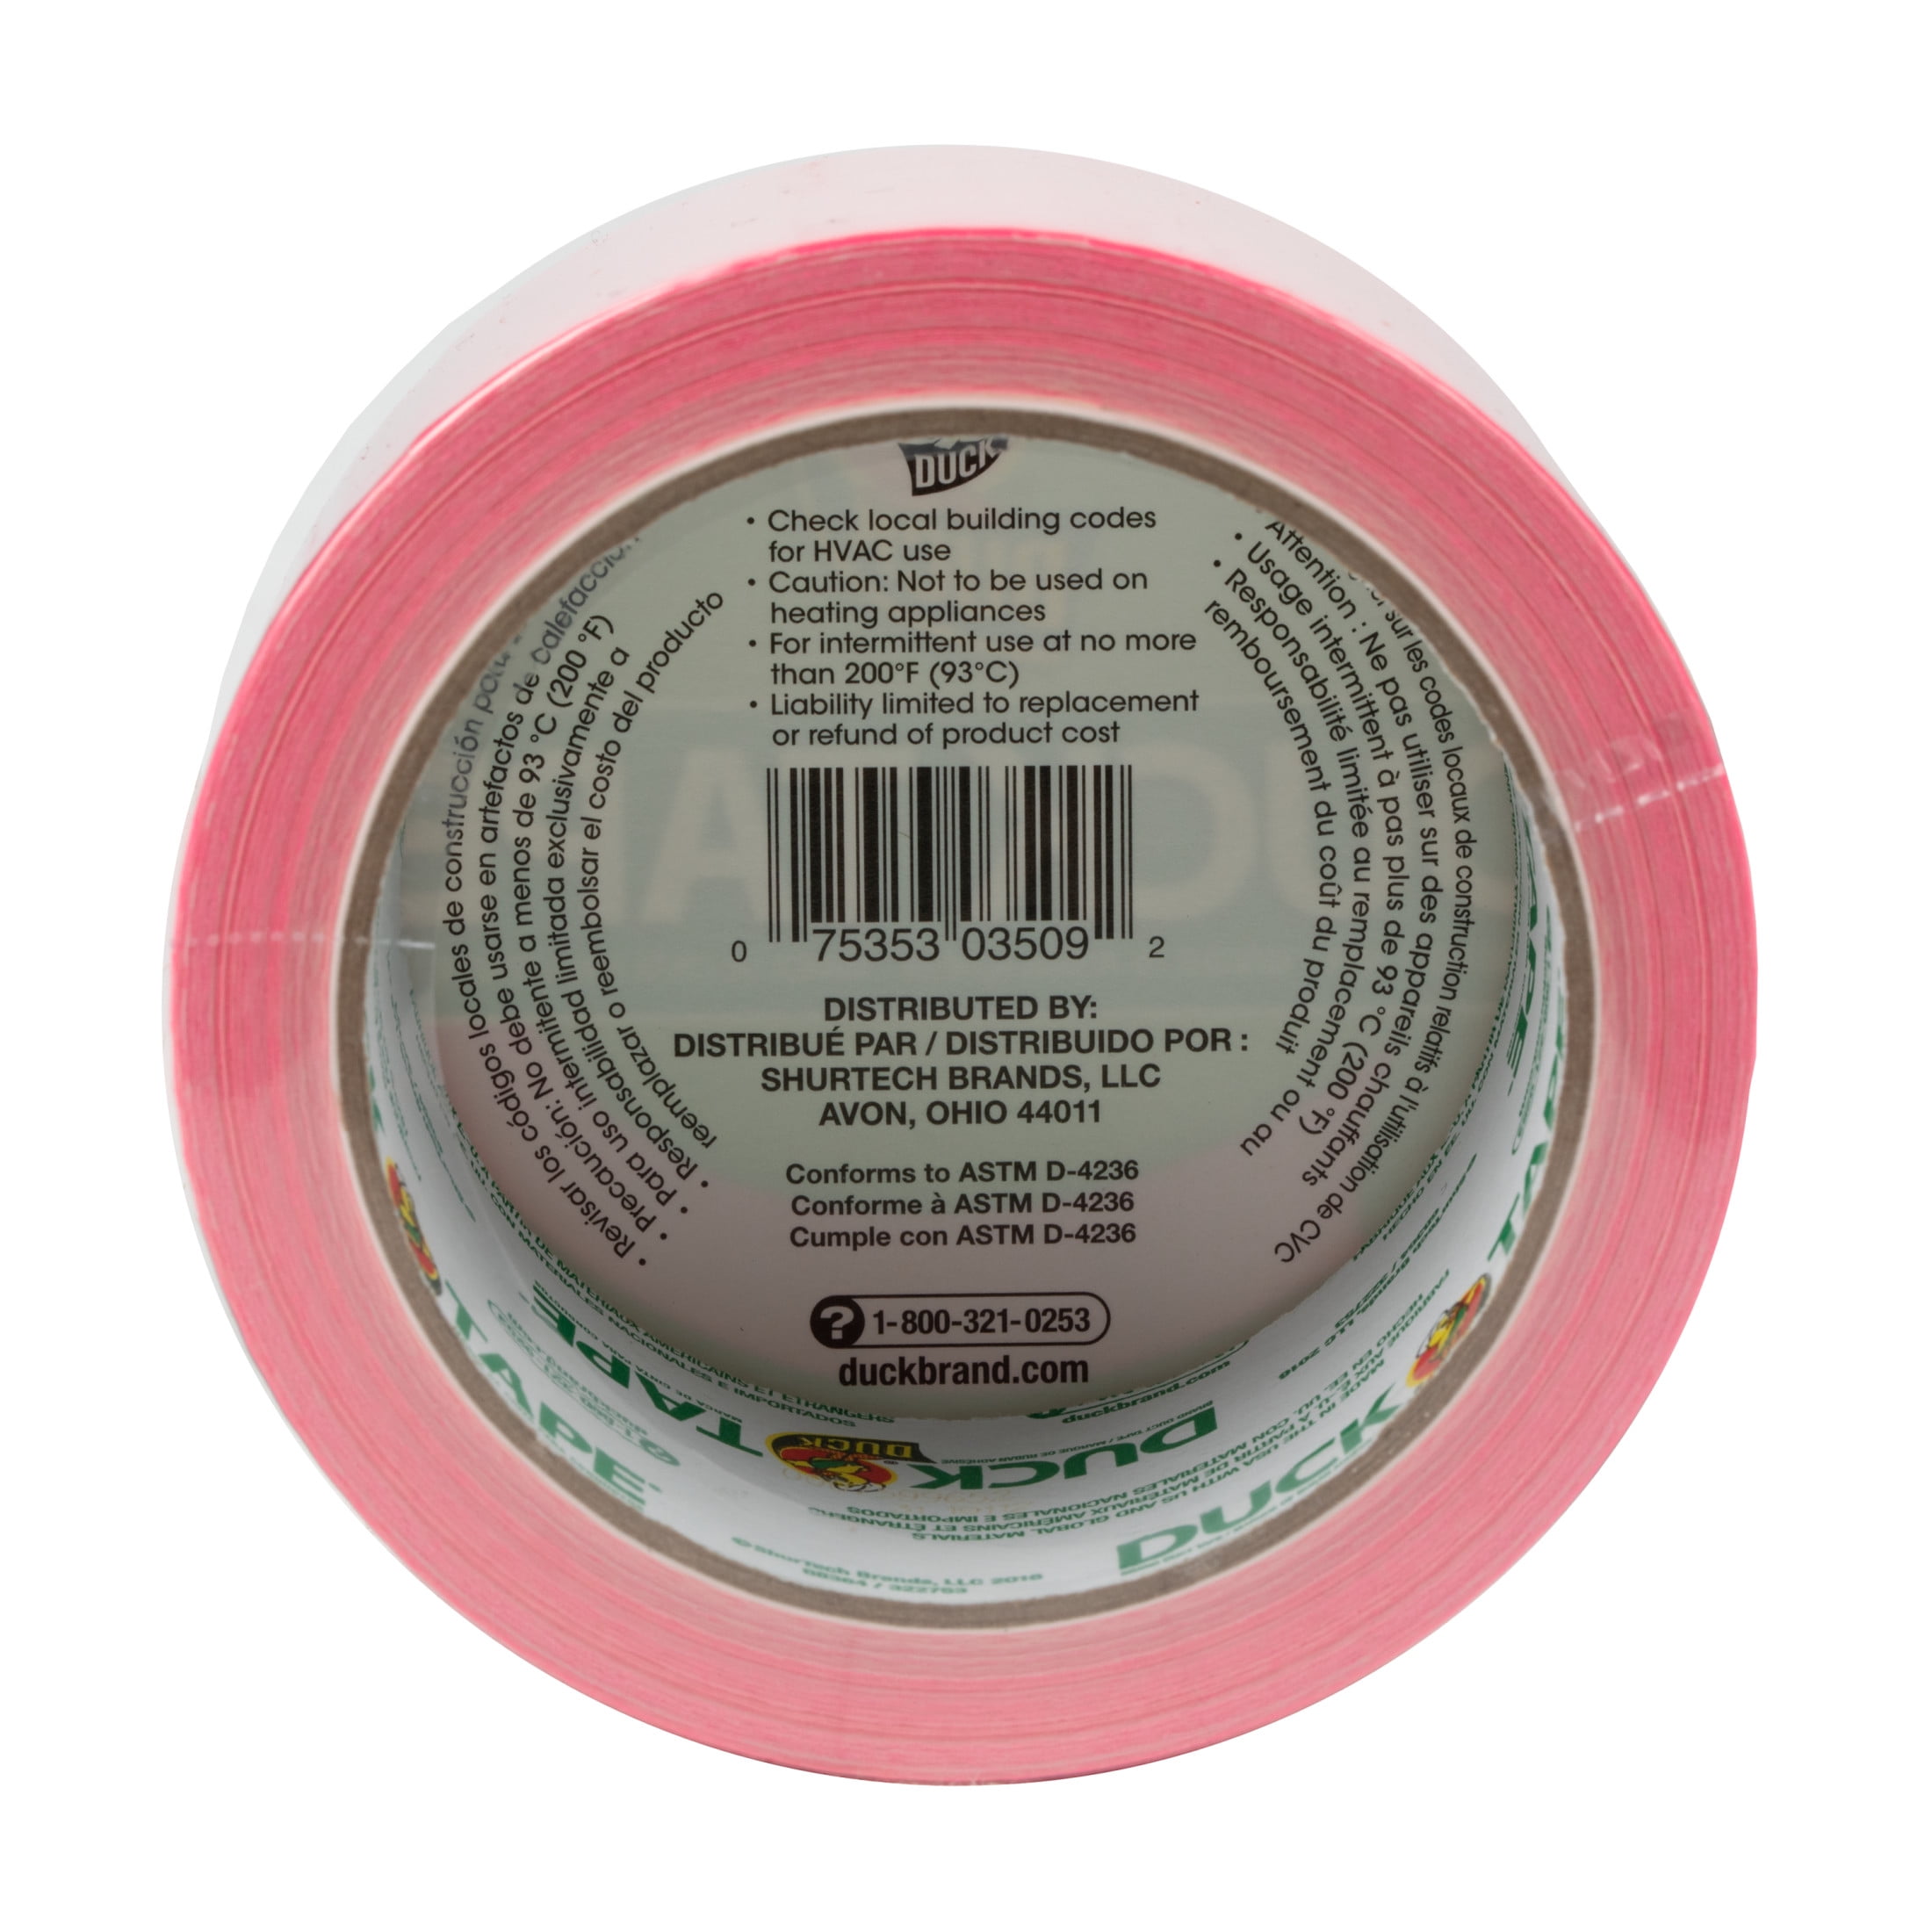 Pro Duct 139 Fluorescent Pink Duct Tape 2 x 60 yard Roll (24 Roll/Case) @